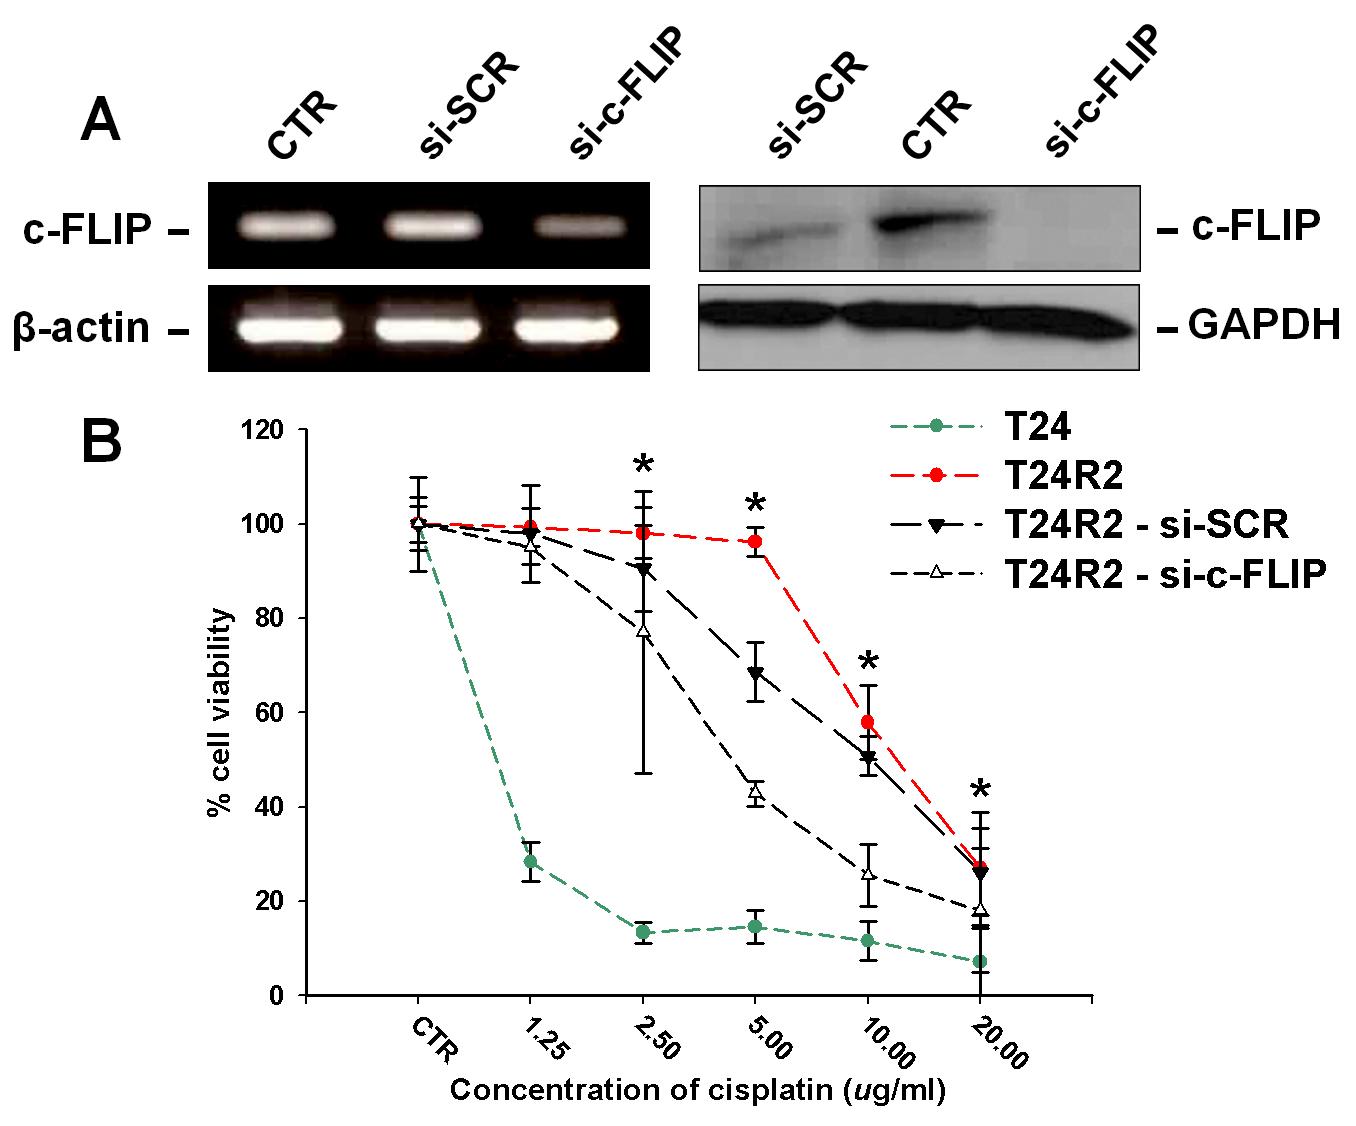 siRNA-mediated knockdown of c-FLIP in T24R2 cells. A) T24R2 cells were transfected with a control scrambled siRNA (Si-SCR) or an siRNA targeting c-FLIP (Si-c-FLIP). c-FLIP expression in indicated transfected cells at the mRNA and protein levels was determined by RT-PCR (left panel) and Western blot analysis (right panel). β-Actin and GAPDH were used as controls. B) Sensitivity of transfectant T24R2 cells to cisplatin. T24R2 cells transfected with scrambled siRNA or c-FLIP siRNA were exposed to increasing doses of cisplatin (1.25-20.0μg/ml) for 72 hours and viability of each cell was assessed by CCK-8 assay and compared with those of T24 and non-transfected T24R2 cells. Each data point represents for mean ± SD of at least three independent experiments and asterisks indicate significantly lower survival of c-FLIP transfected T24R2 cells compared with non-transfected T24R2 cells (p <0.05).